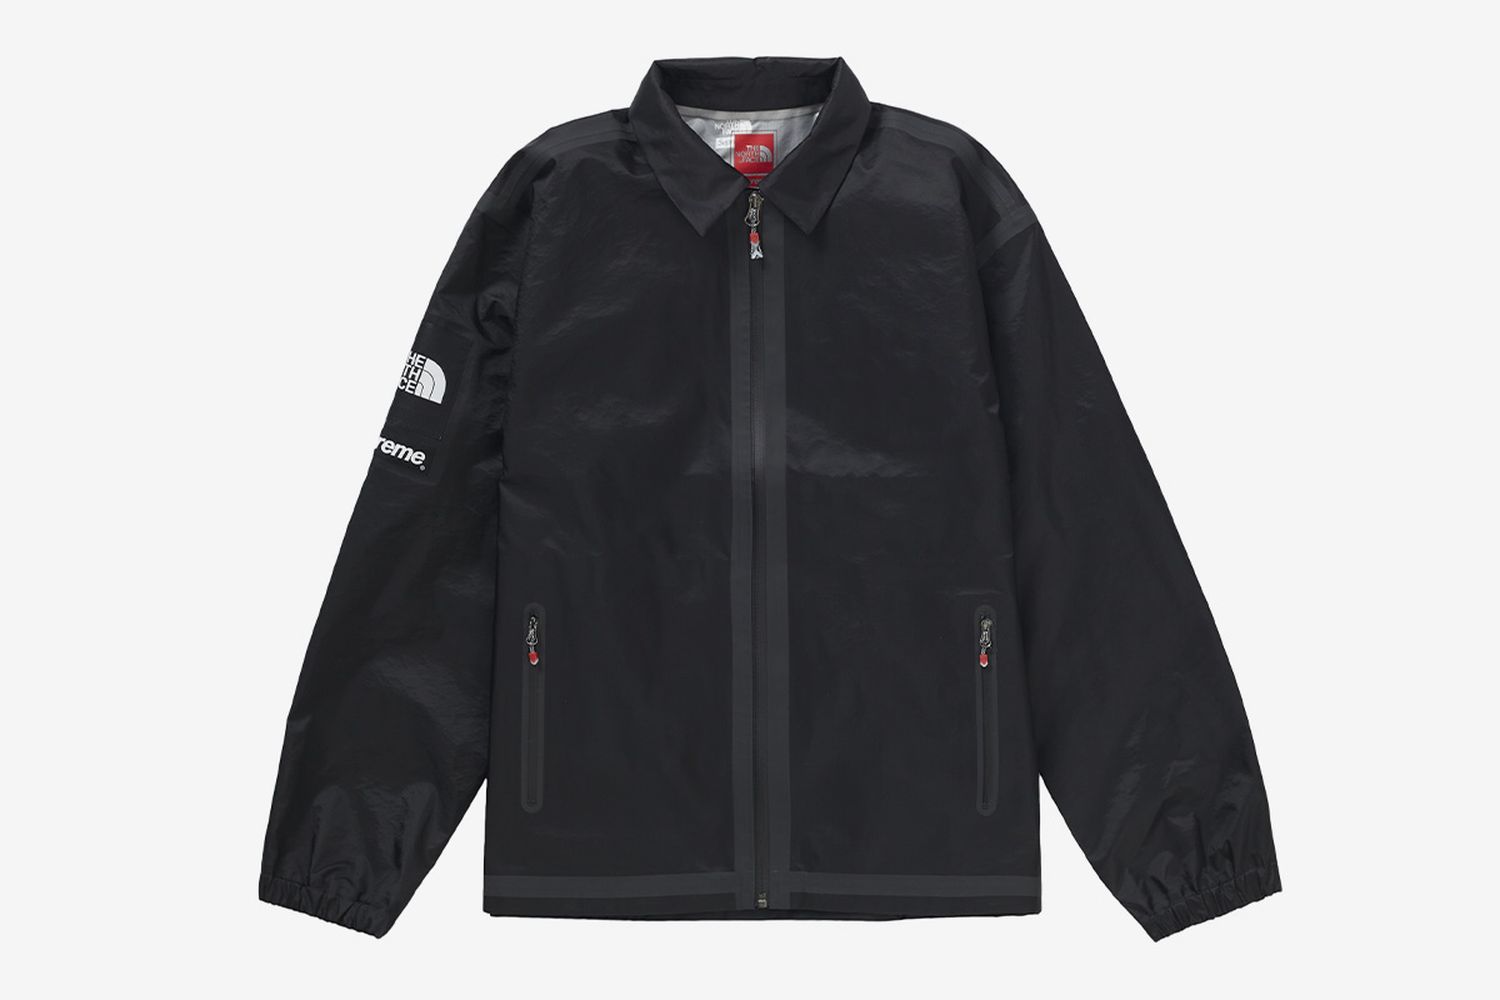 Supreme x The North Face SS21: Where to Buy & Resale Prices